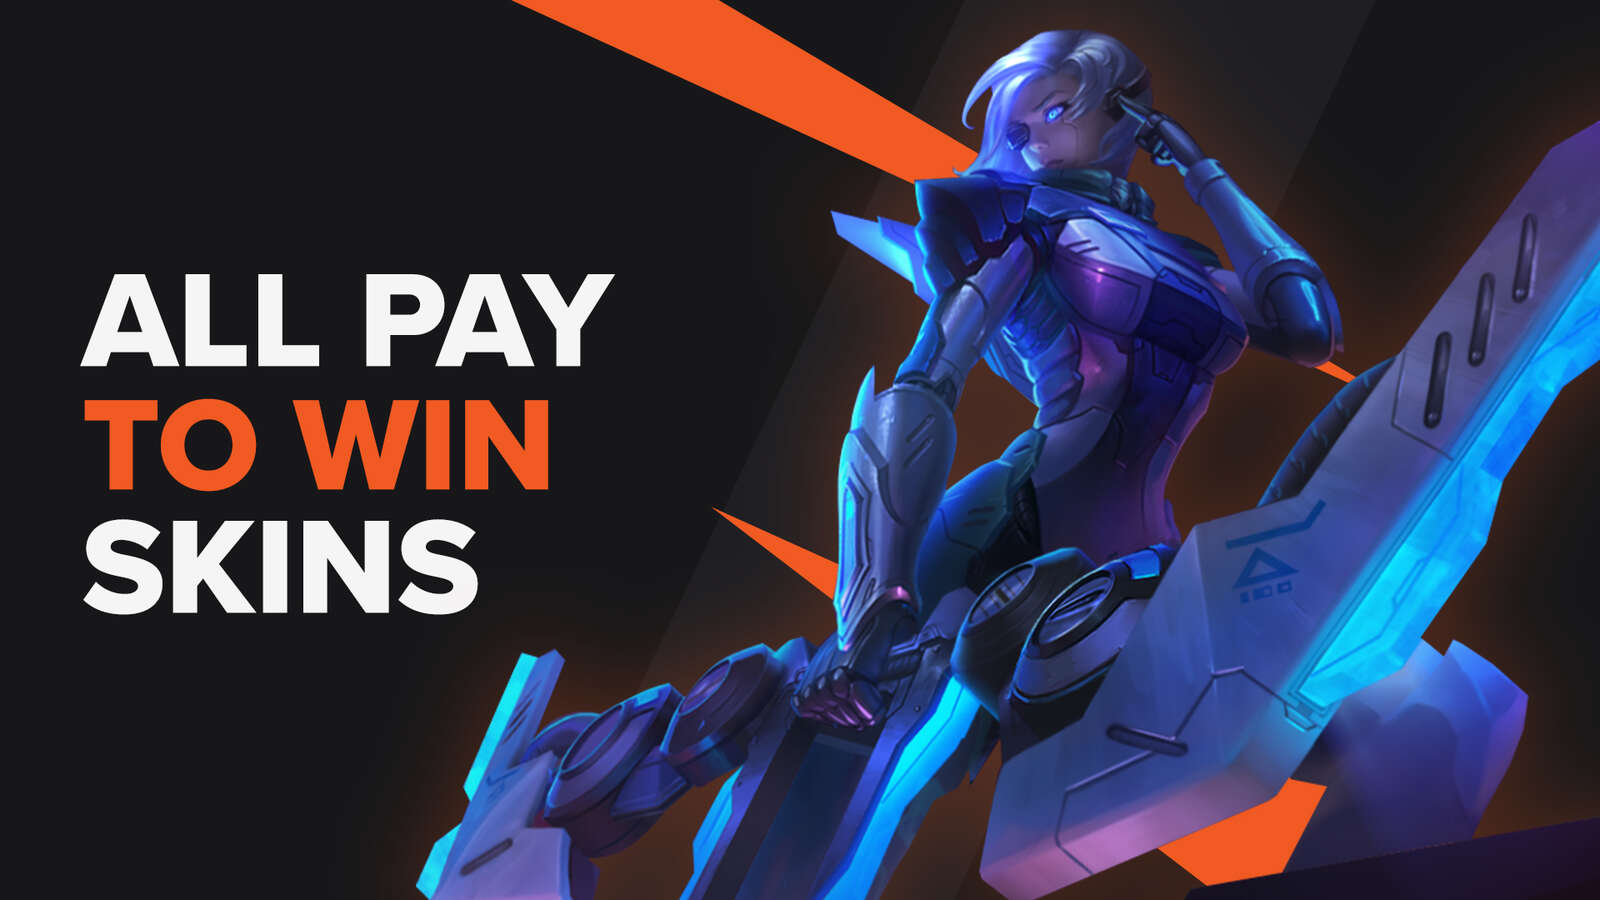 Pay to win skins in League of Legends